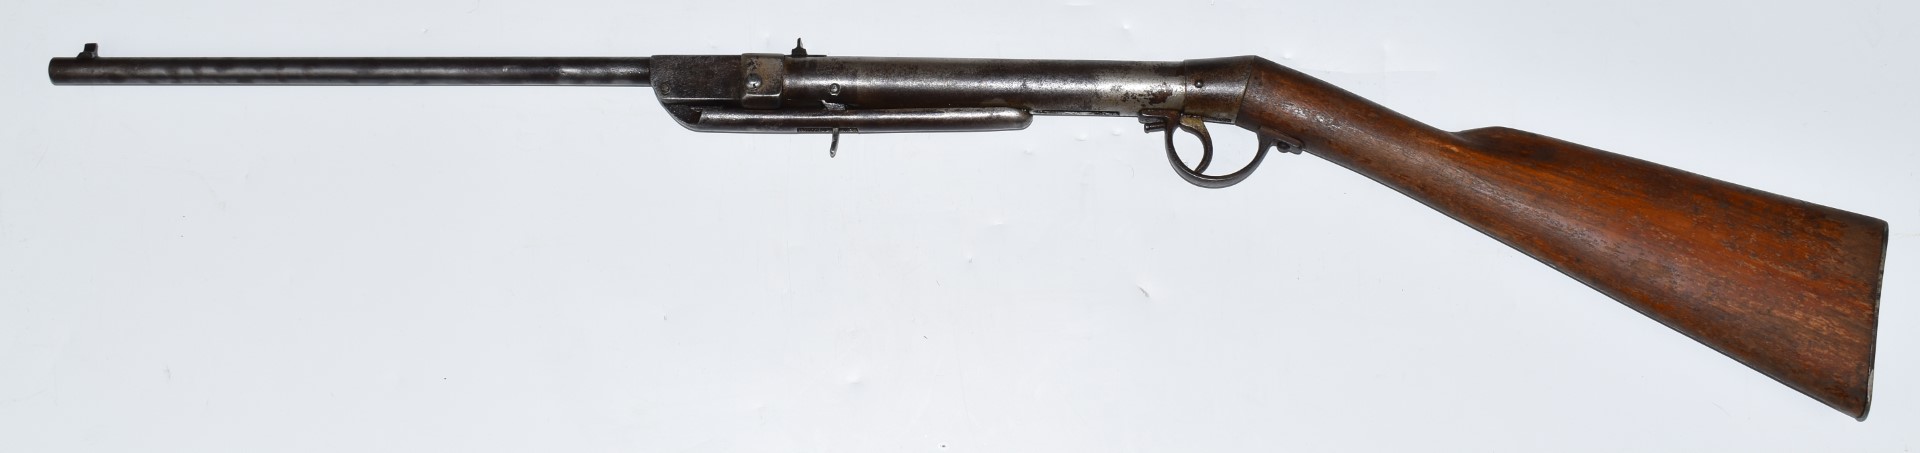 Friedrich Langenhan The Millita Patent .177 air rifle with adjustable trigger and alignment - Image 7 of 7